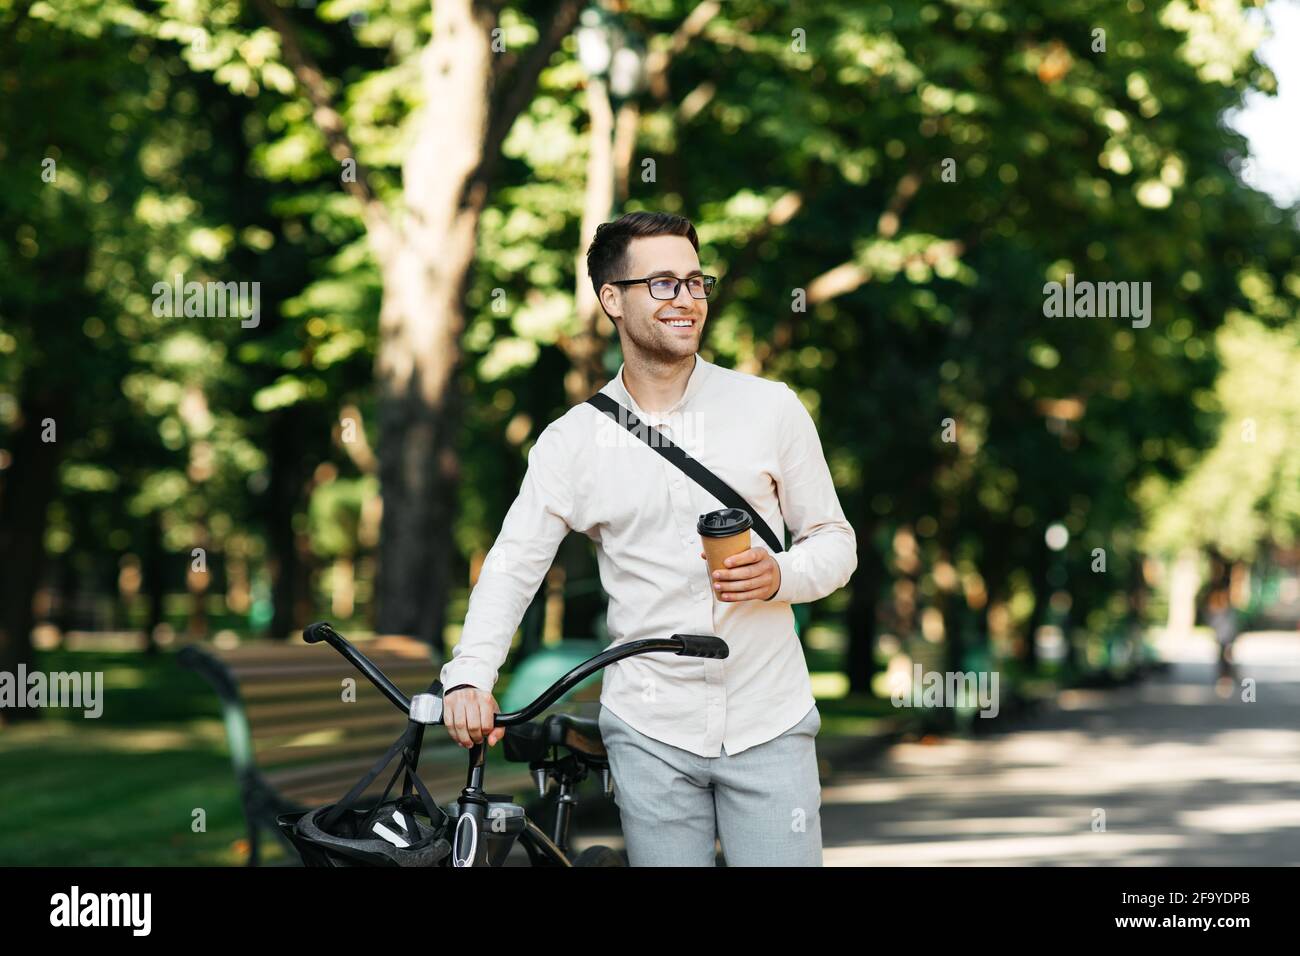 Healthy and active lifestyle, going to work on eco transport Stock Photo